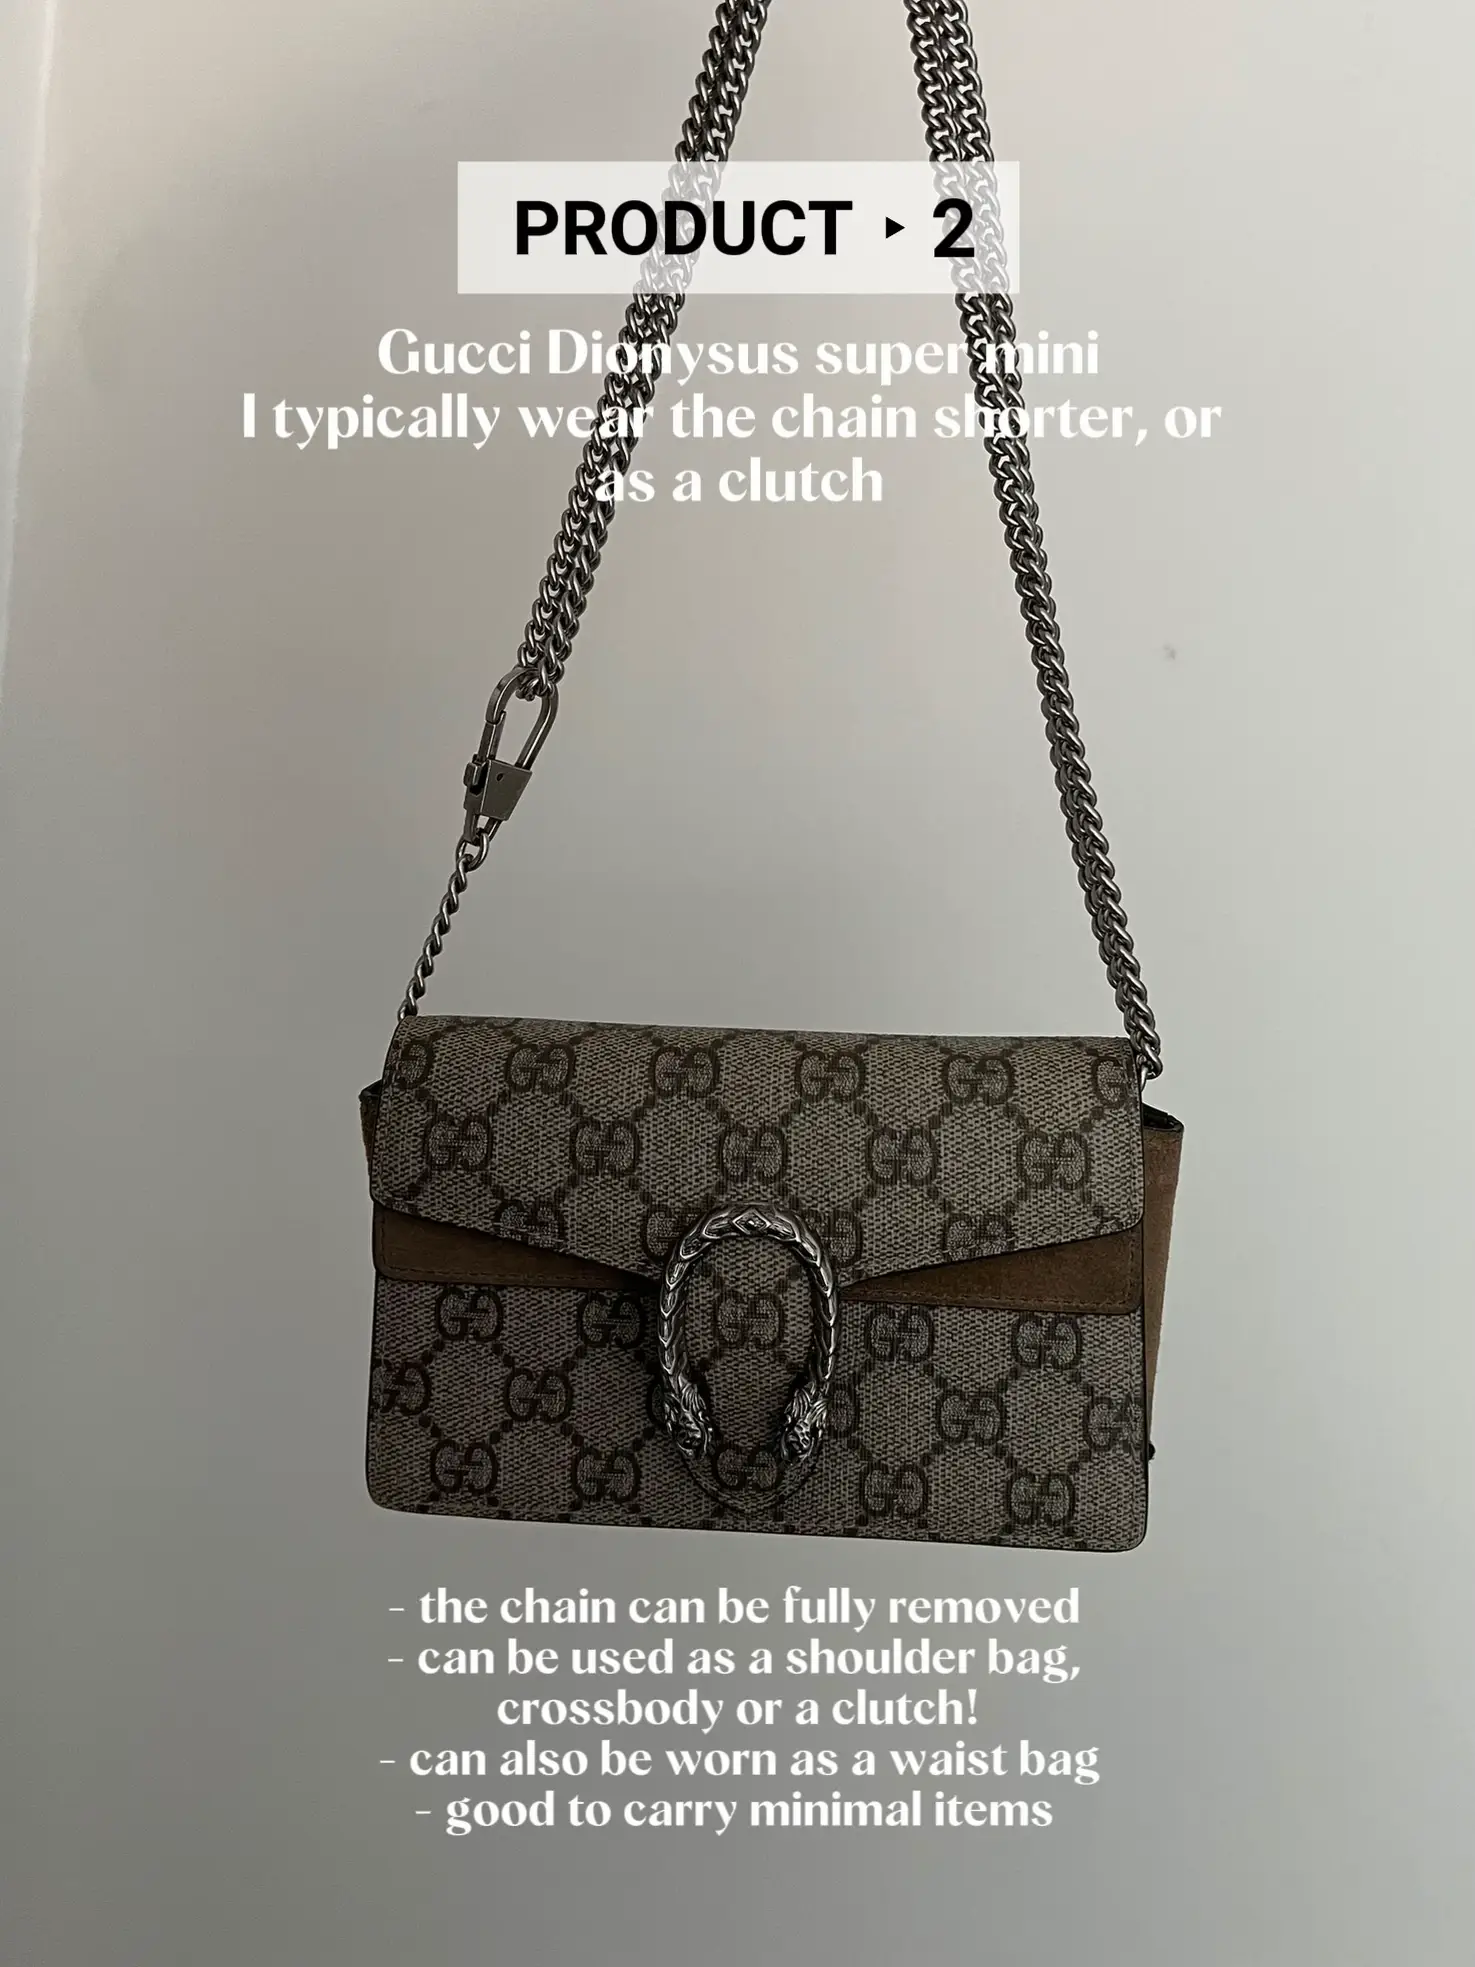 GUCCI DIONYSUS SUPER MINI REVIEW, PROS + CONS, DIFFERENT WAYS TO WEAR